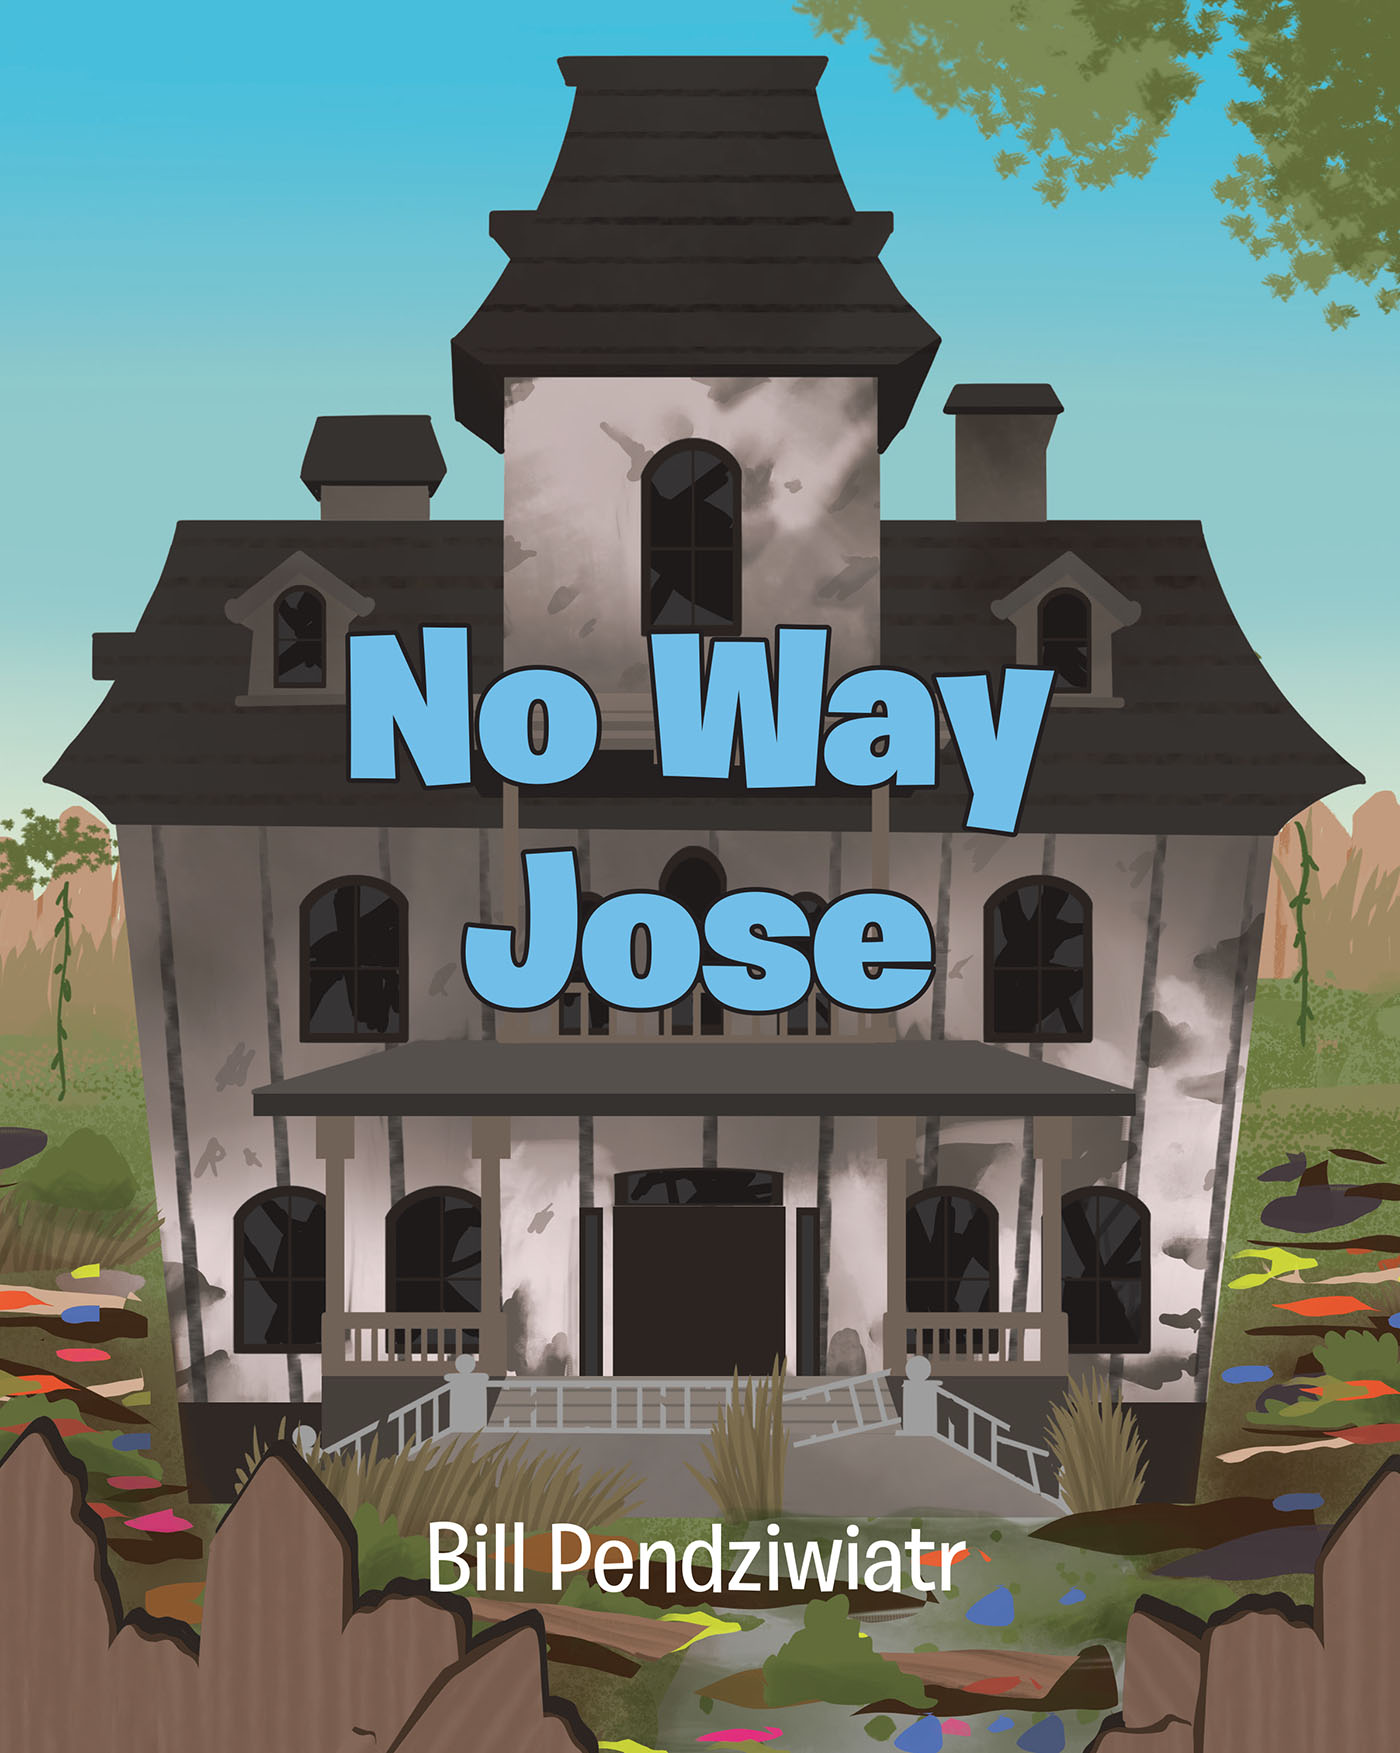 Bill Pendziwiatr’s Newly Released "No Way Jose" is an Entertaining Story of Two Young Friends and an Unexpected Meeting with the Local Police